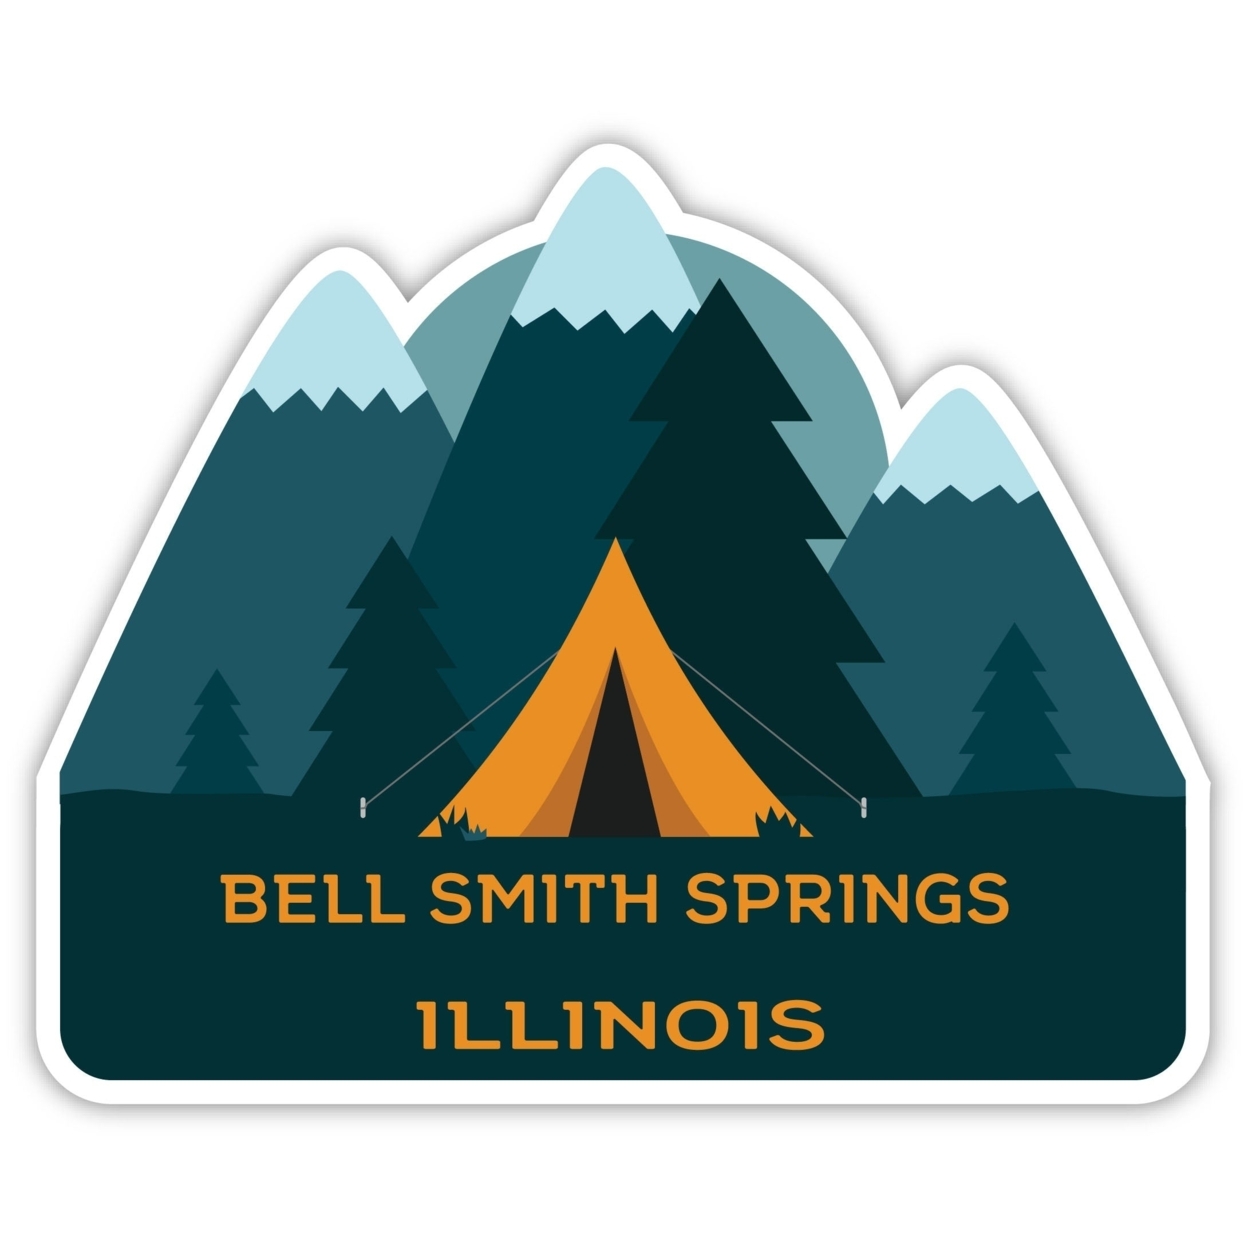 Bell Smith Springs Illinois Souvenir Decorative Stickers (Choose Theme And Size) - Single Unit, 8-Inch, Bear